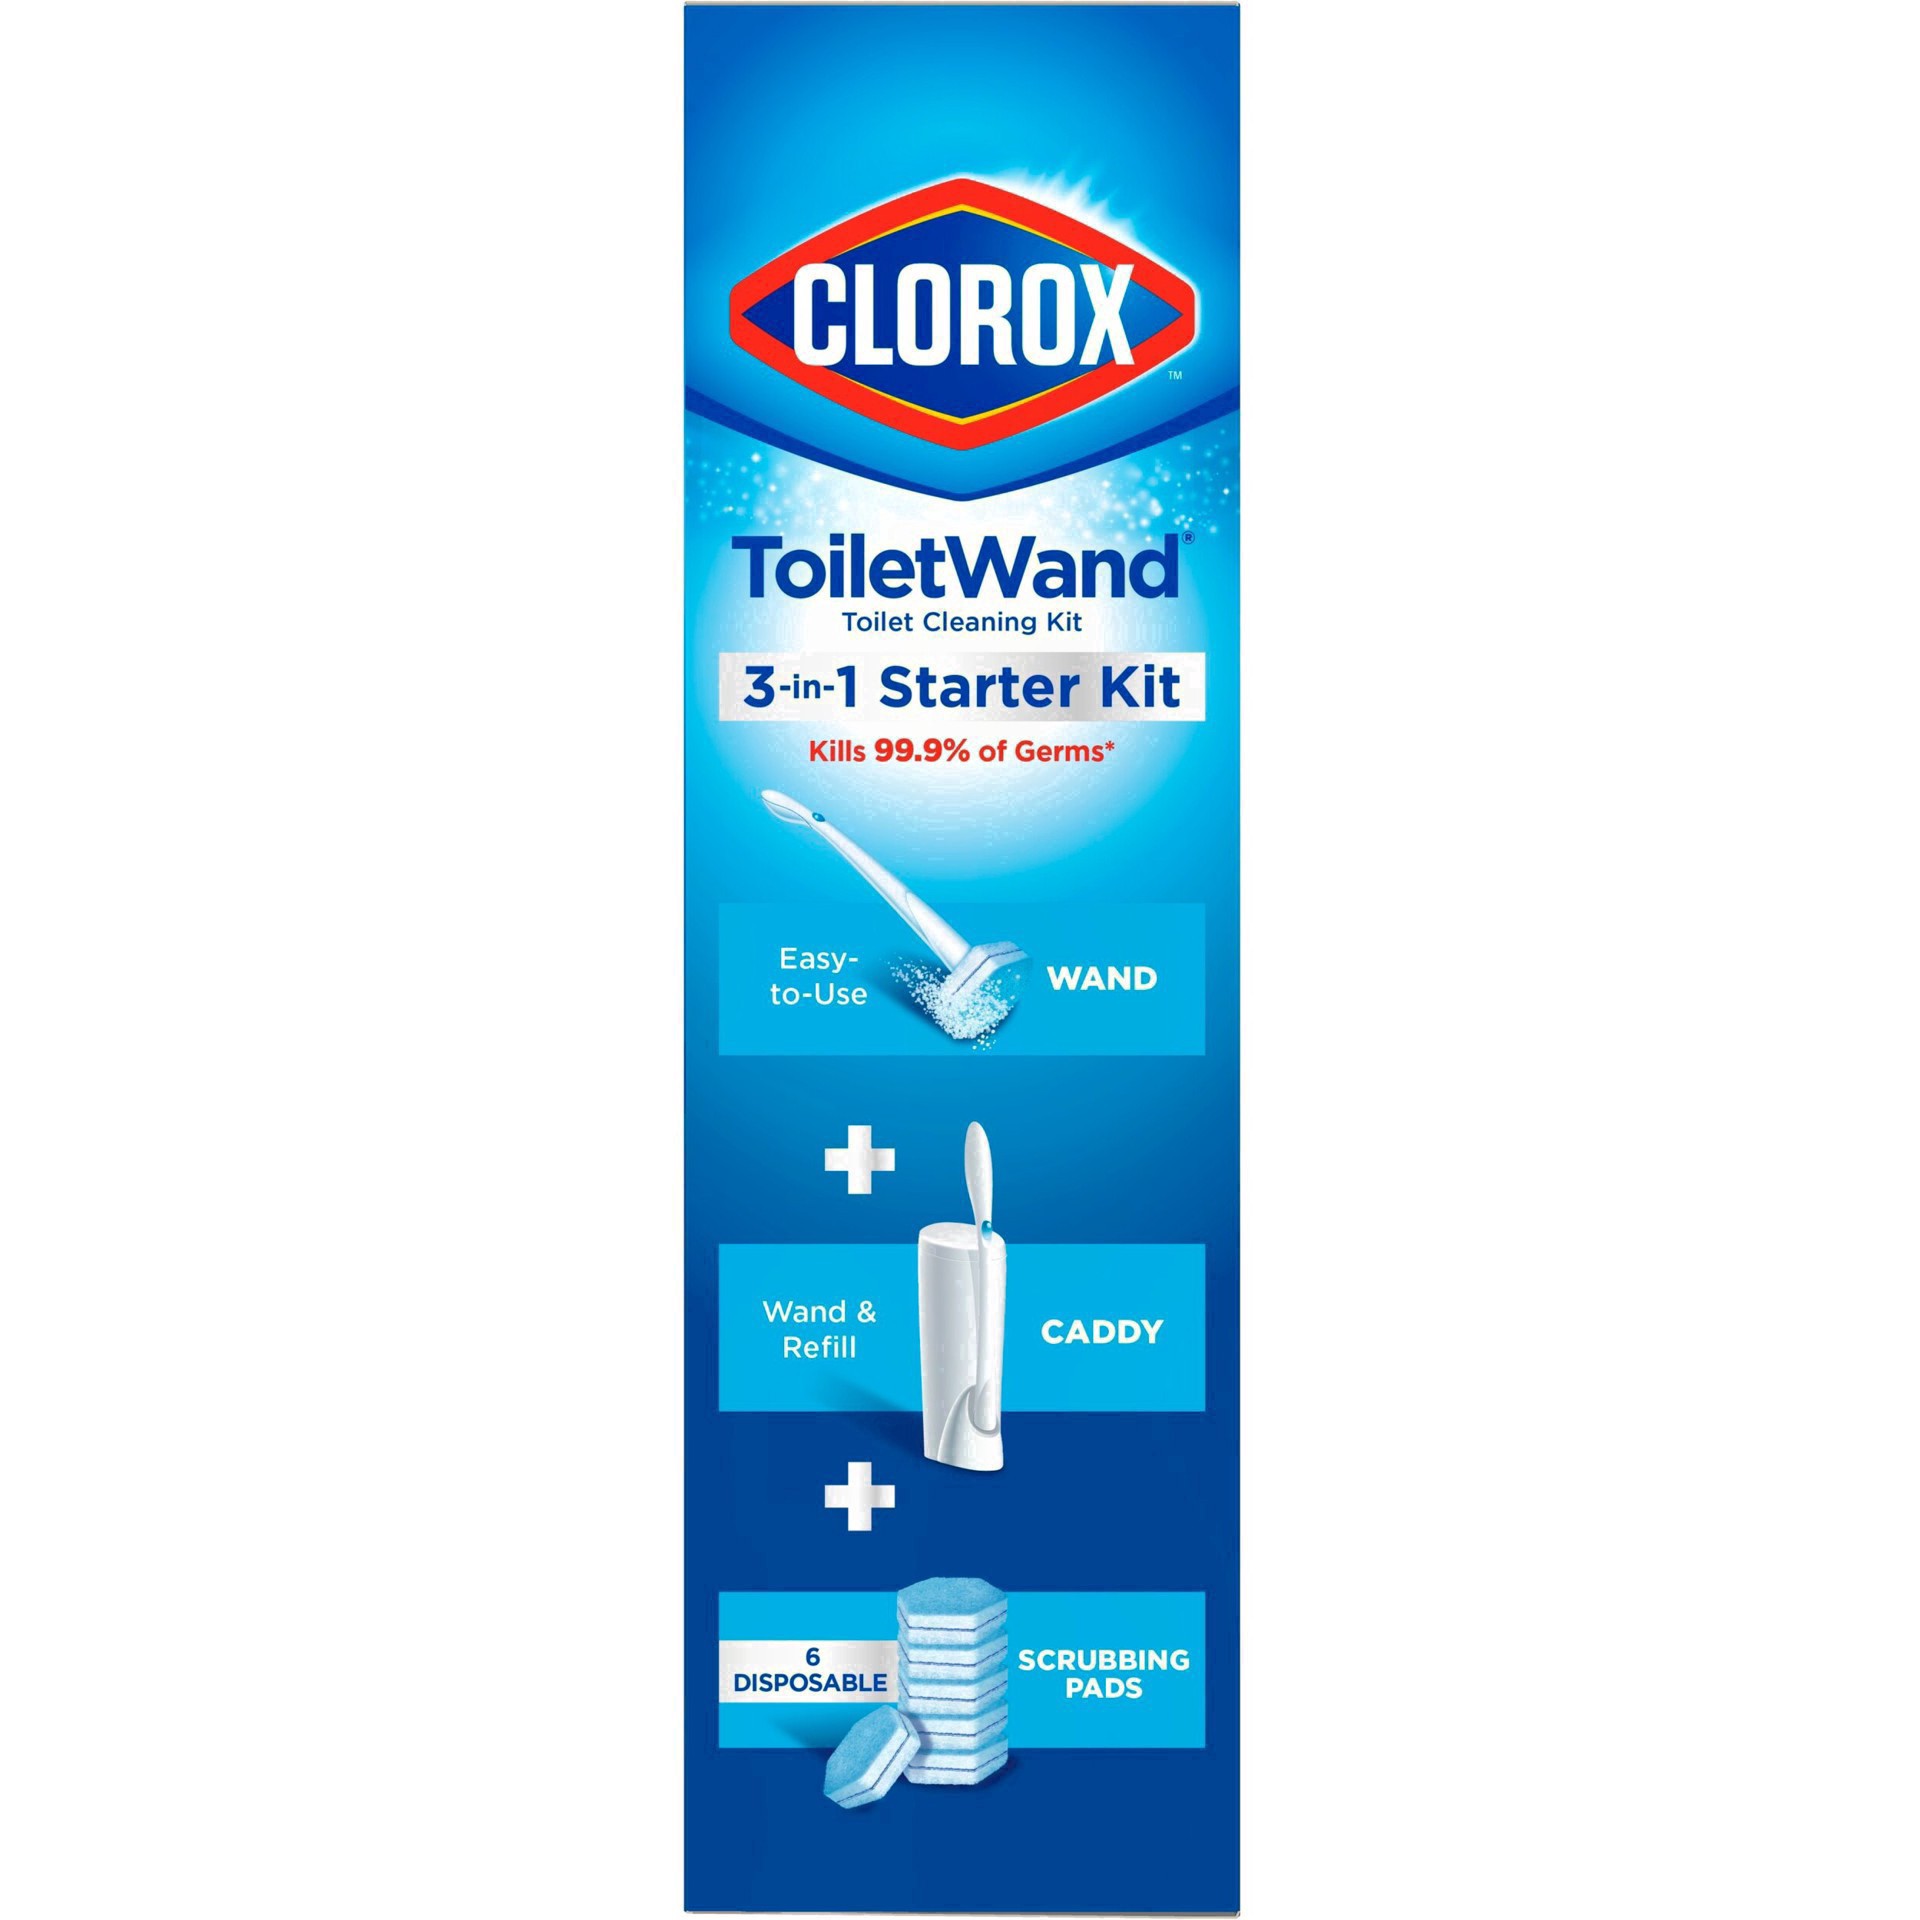 slide 41 of 176, Clorox Toilet Wand 3-in-1 Starter Toliet Cleaning Kit, 1 ct